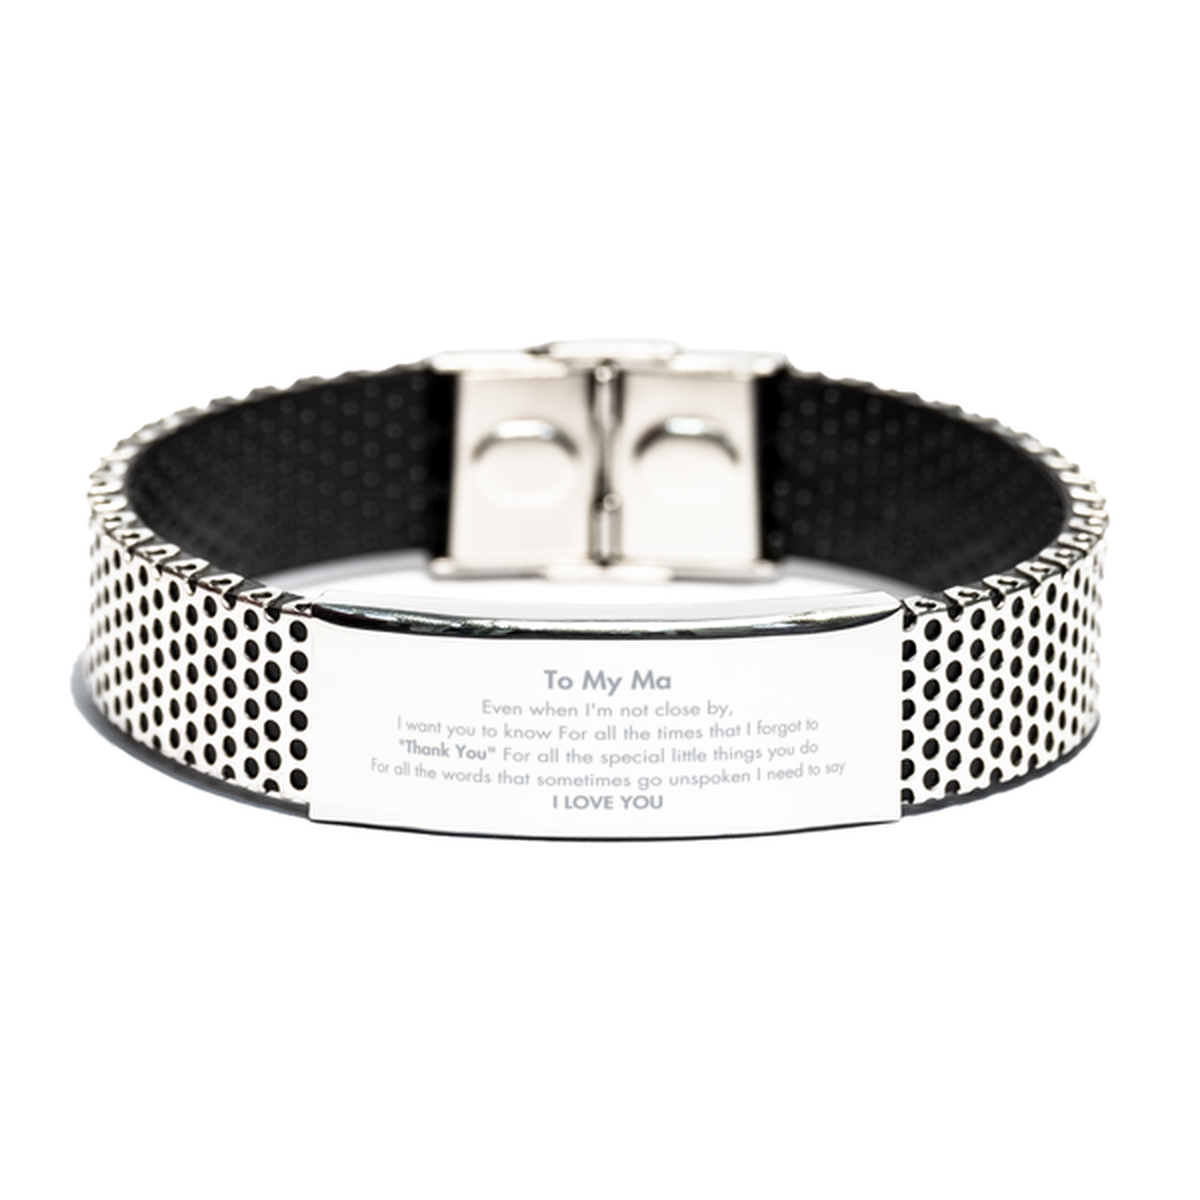 Thank You Gifts for Ma, Keepsake Stainless Steel Bracelet Gifts for Ma Birthday Mother's day Father's Day Ma For all the words That sometimes go unspoken I need to say I LOVE YOU